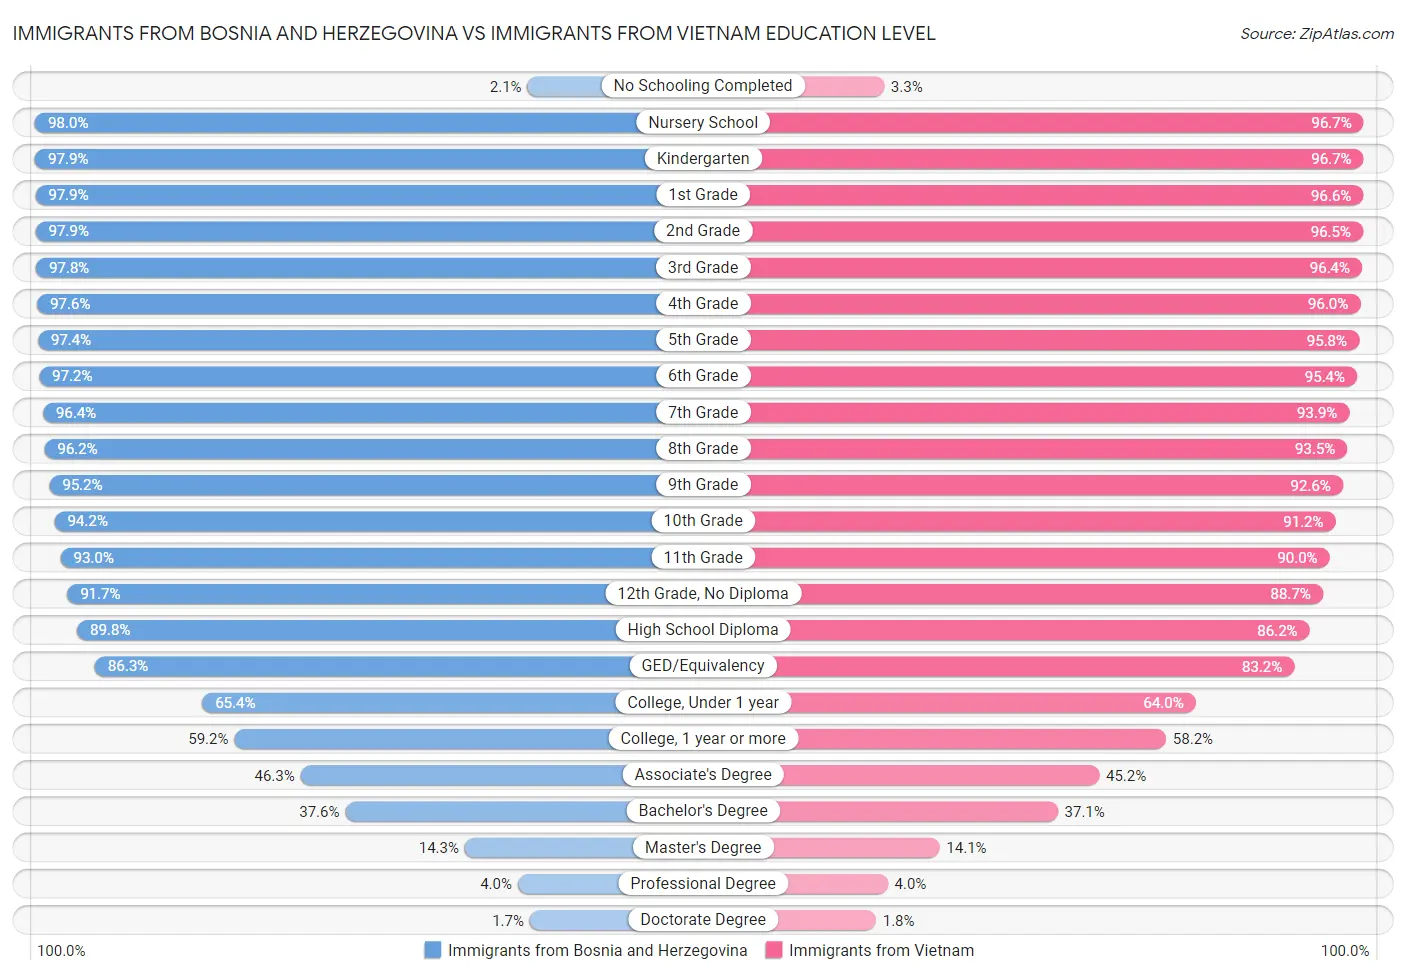 Immigrants from Bosnia and Herzegovina vs Immigrants from Vietnam Education Level